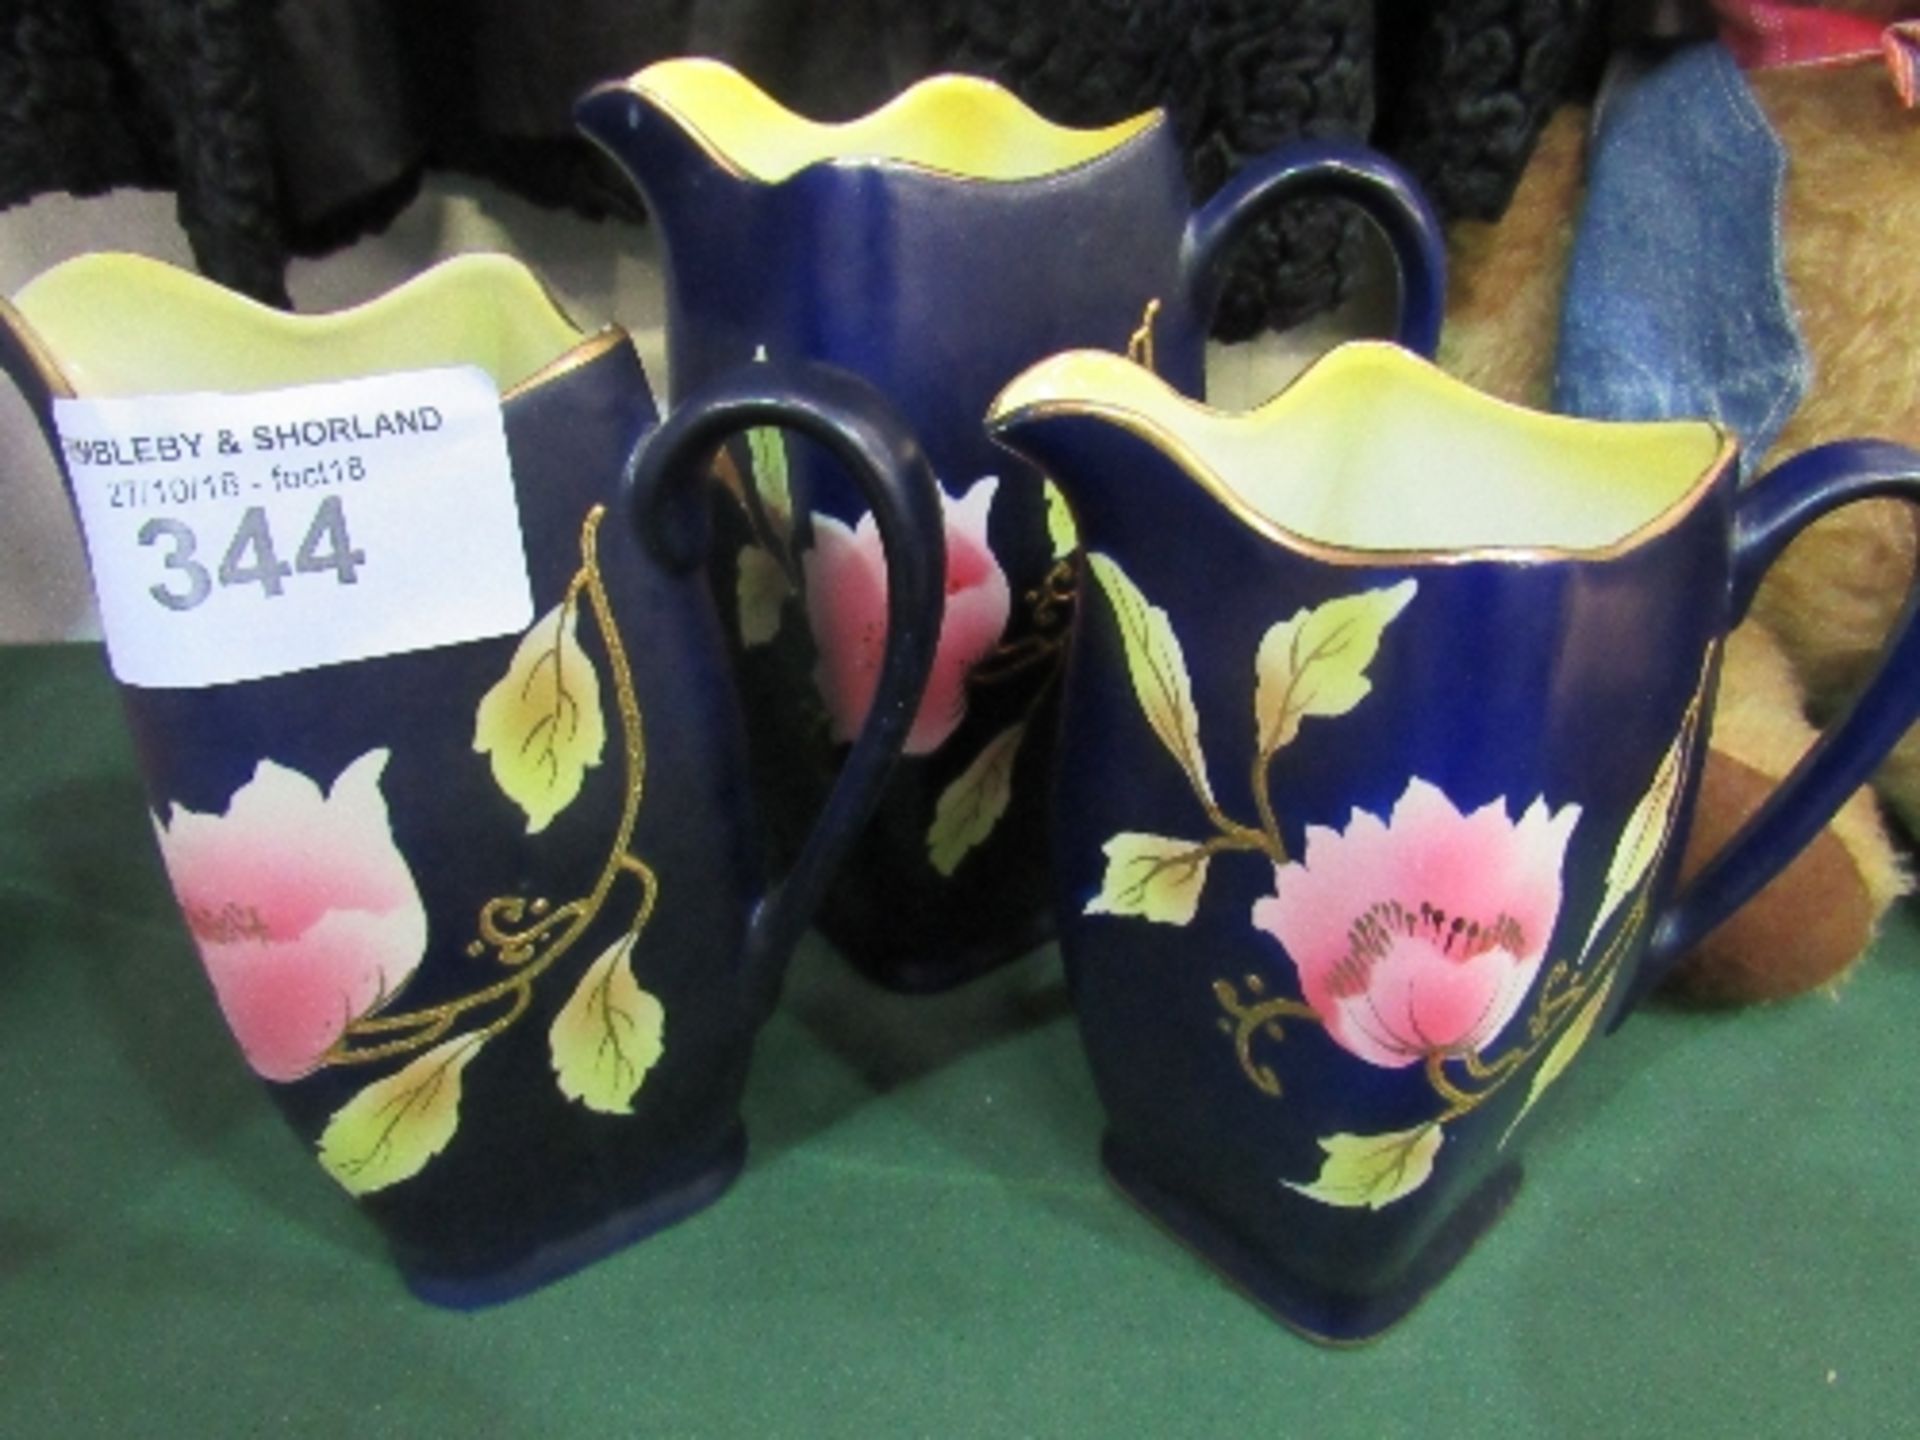 3 graduated jugs, blue with gold rims & flower pattern, 1920's/1930's. Price guide £15-20.